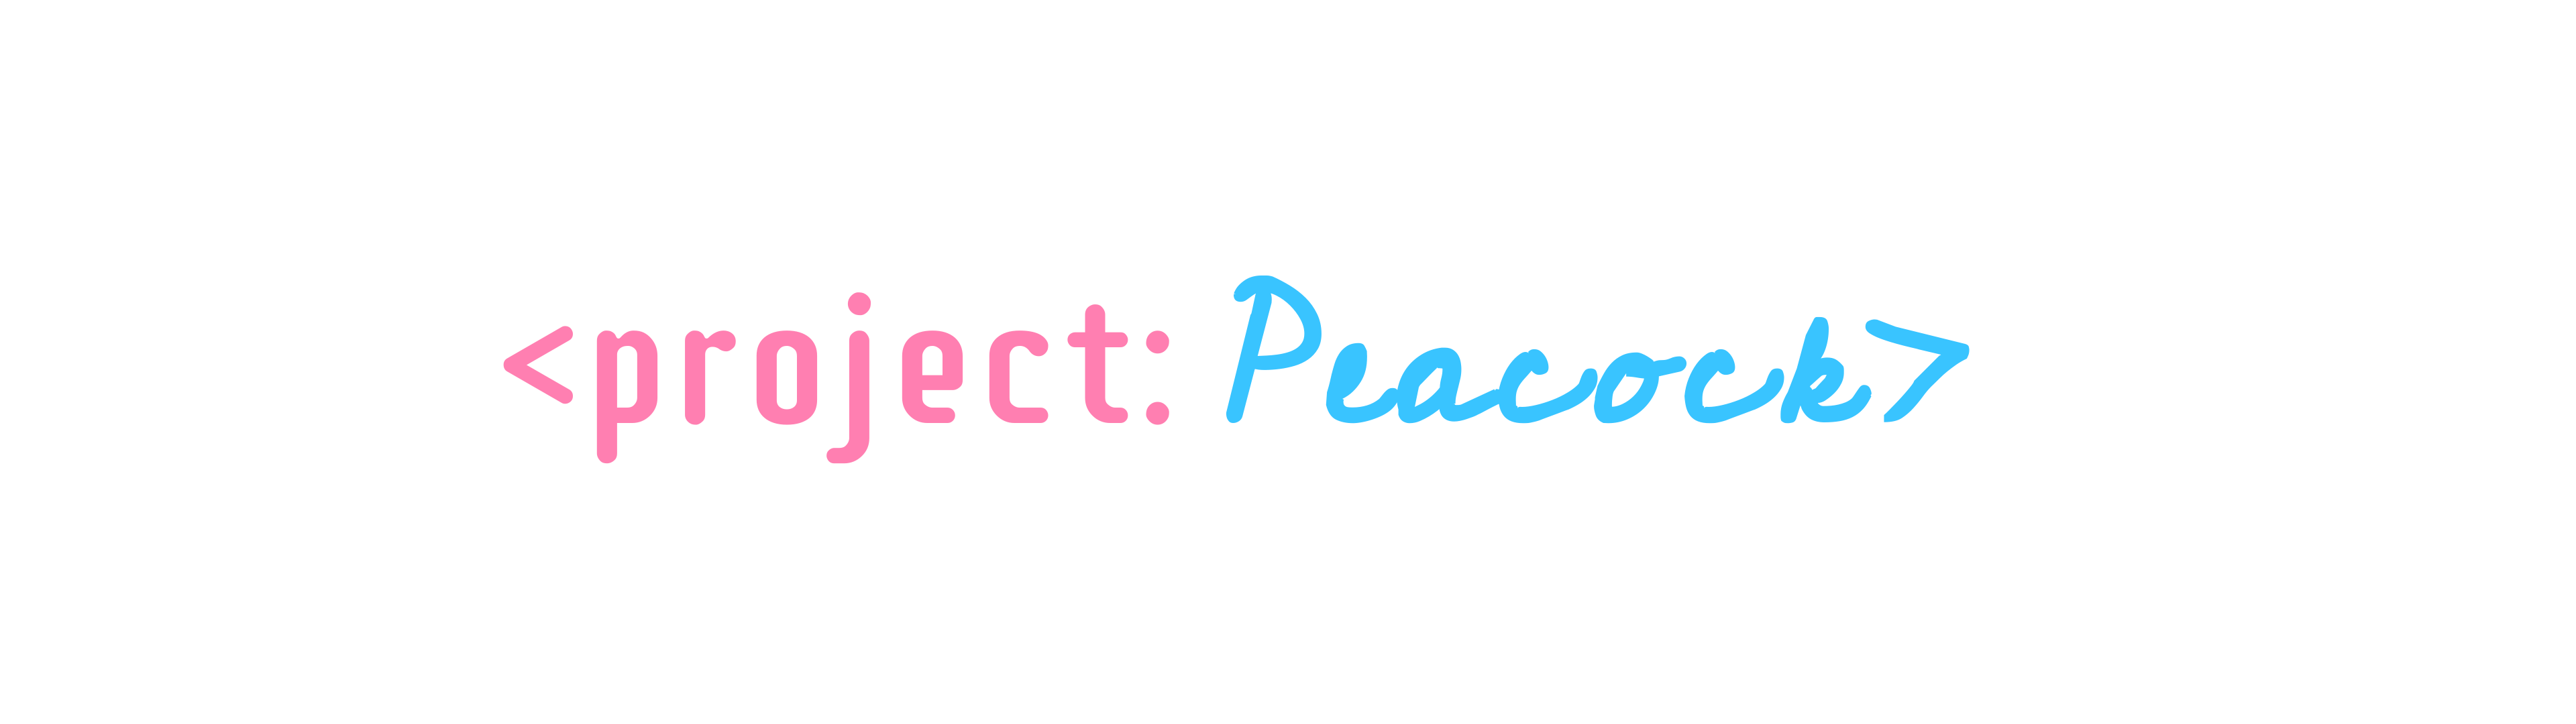 10355 Project Peacock